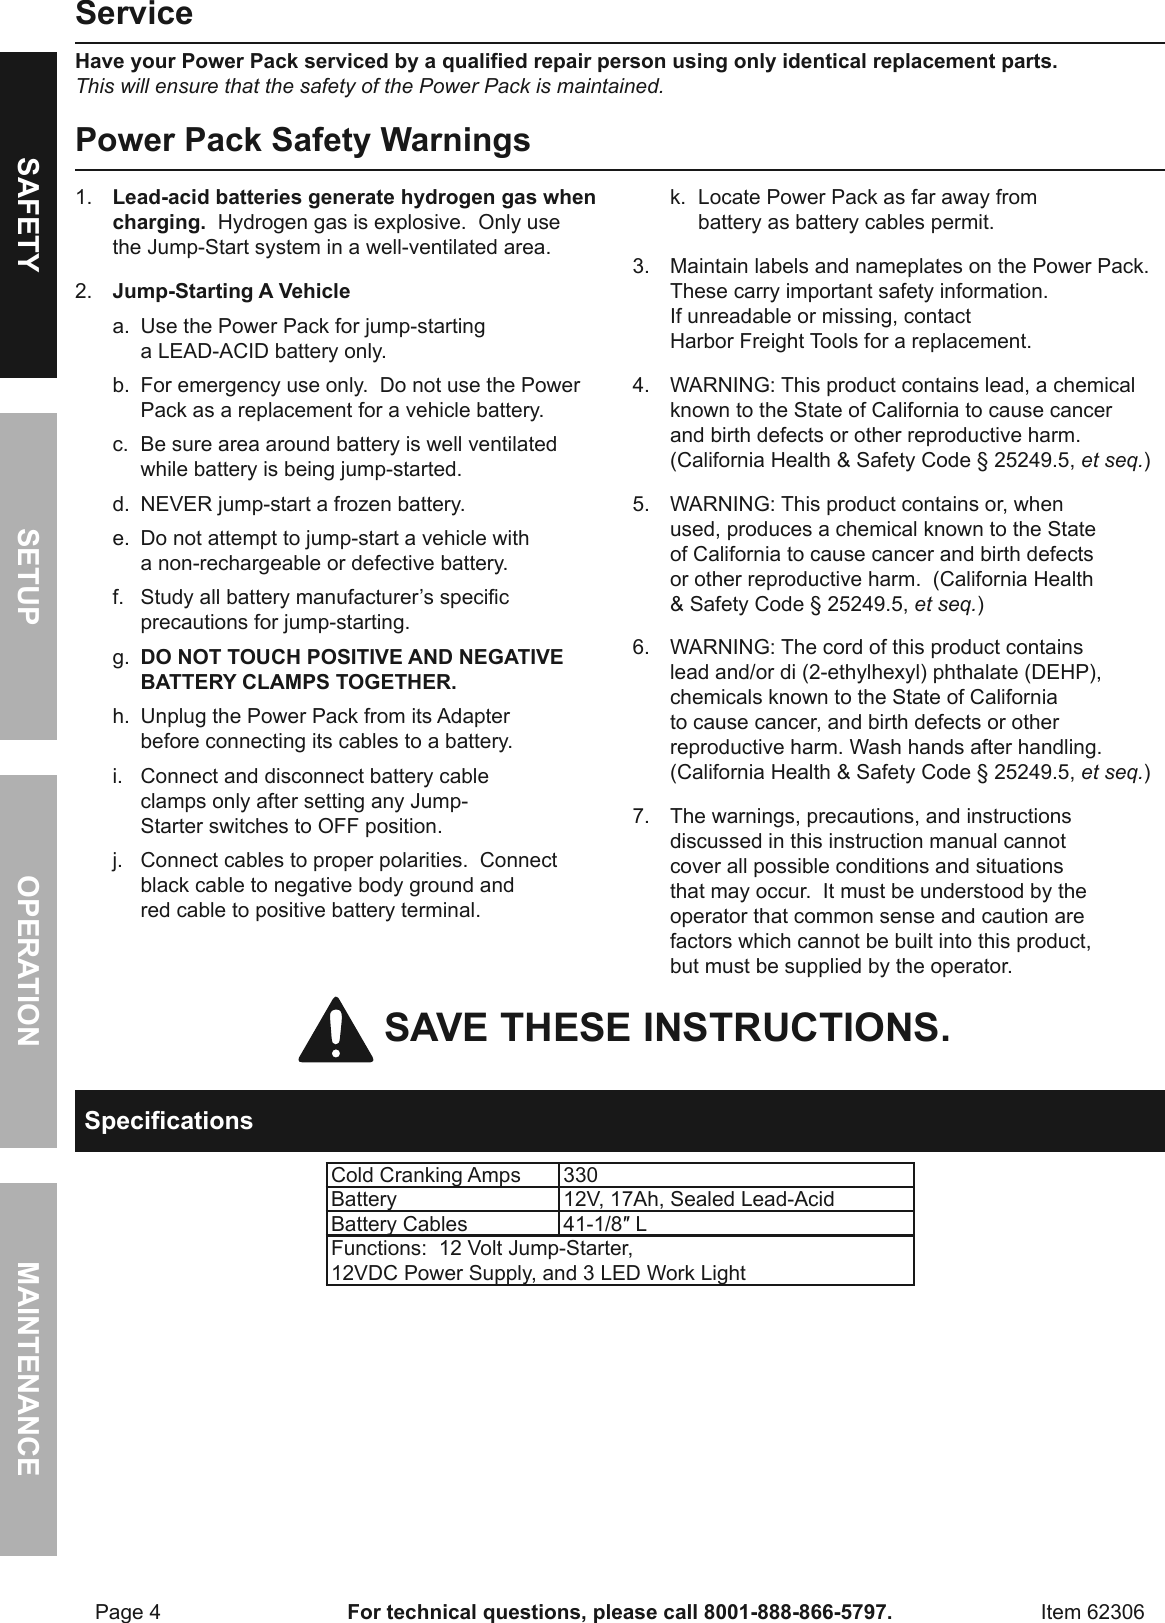 Page 4 of 12 - Manual For The 62306 3-in-1 Portable Power Pack With Jump Starter